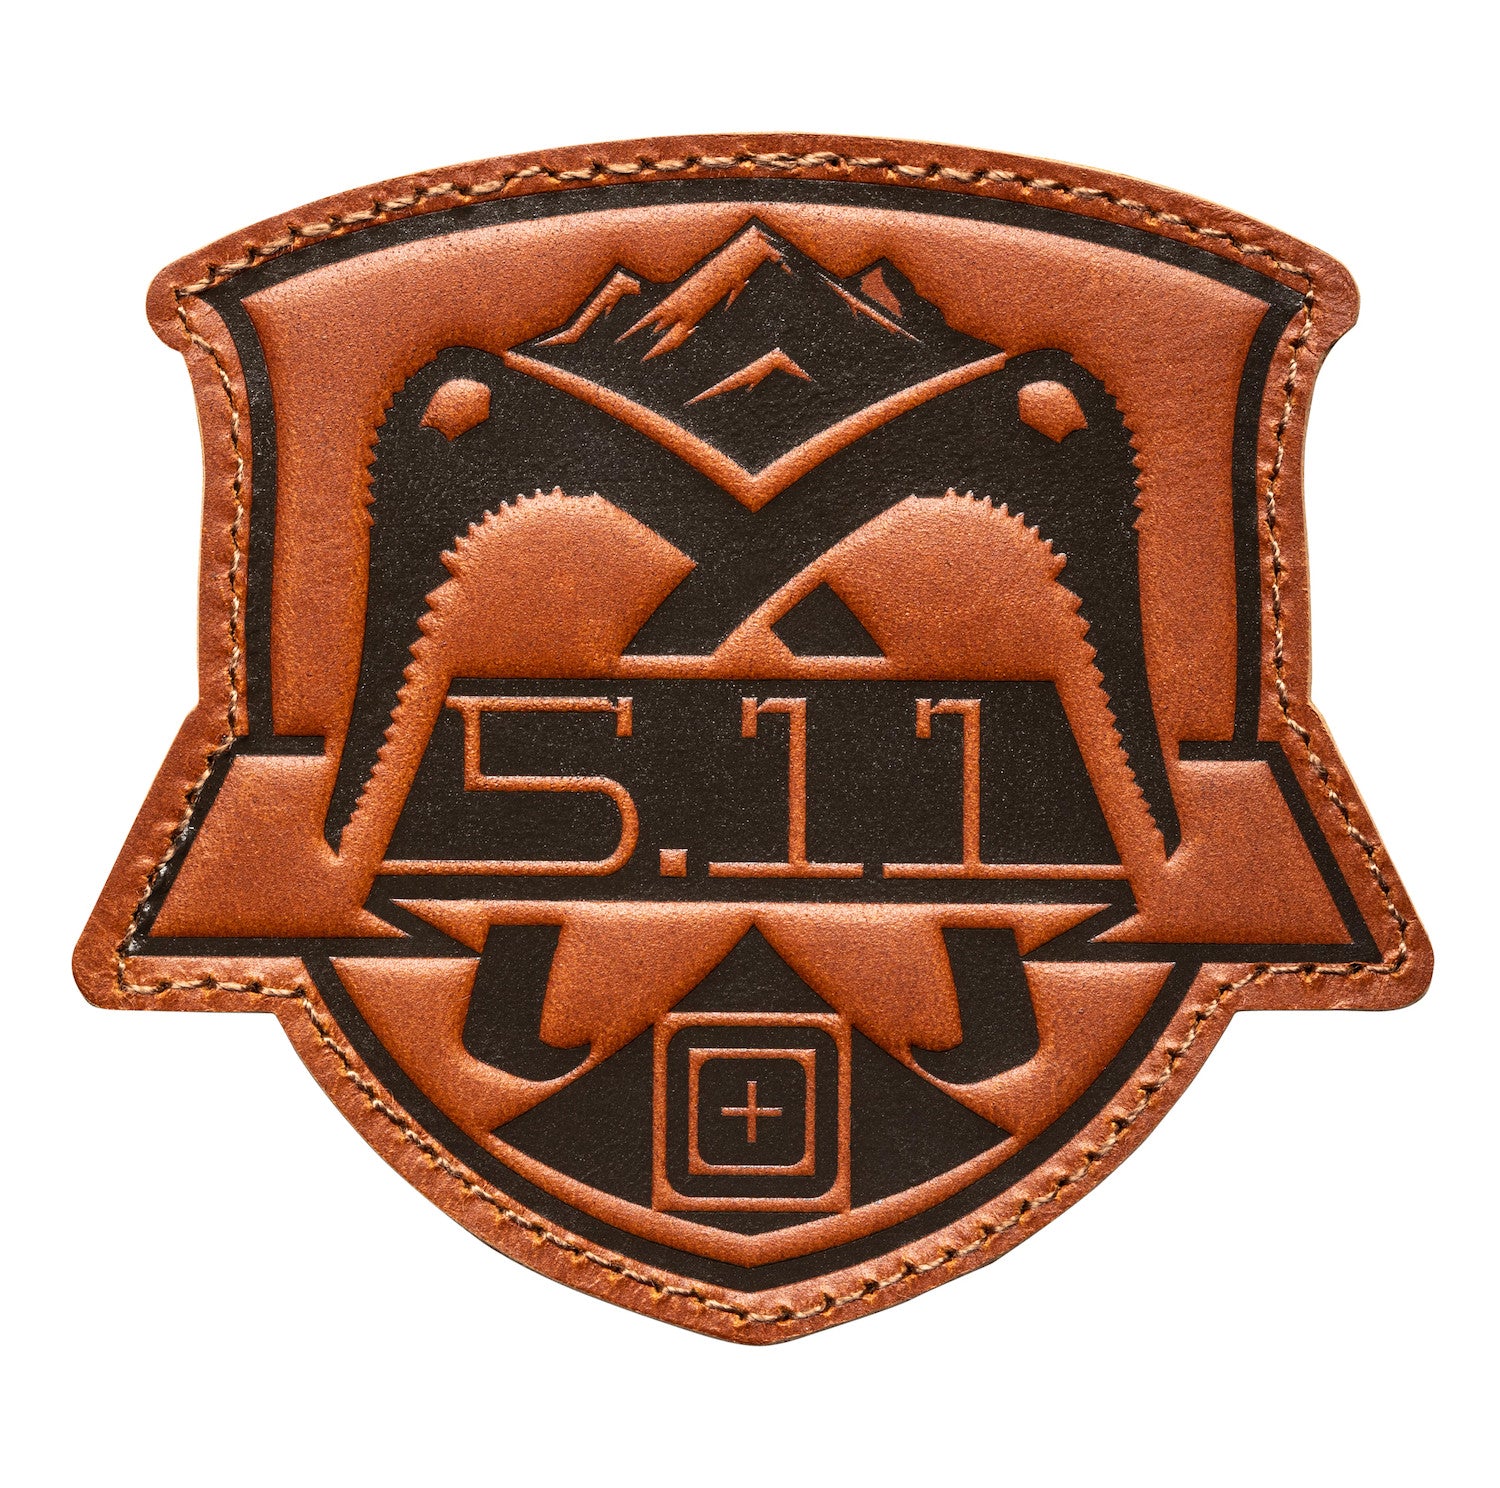 5.11 Mountaineer Patch